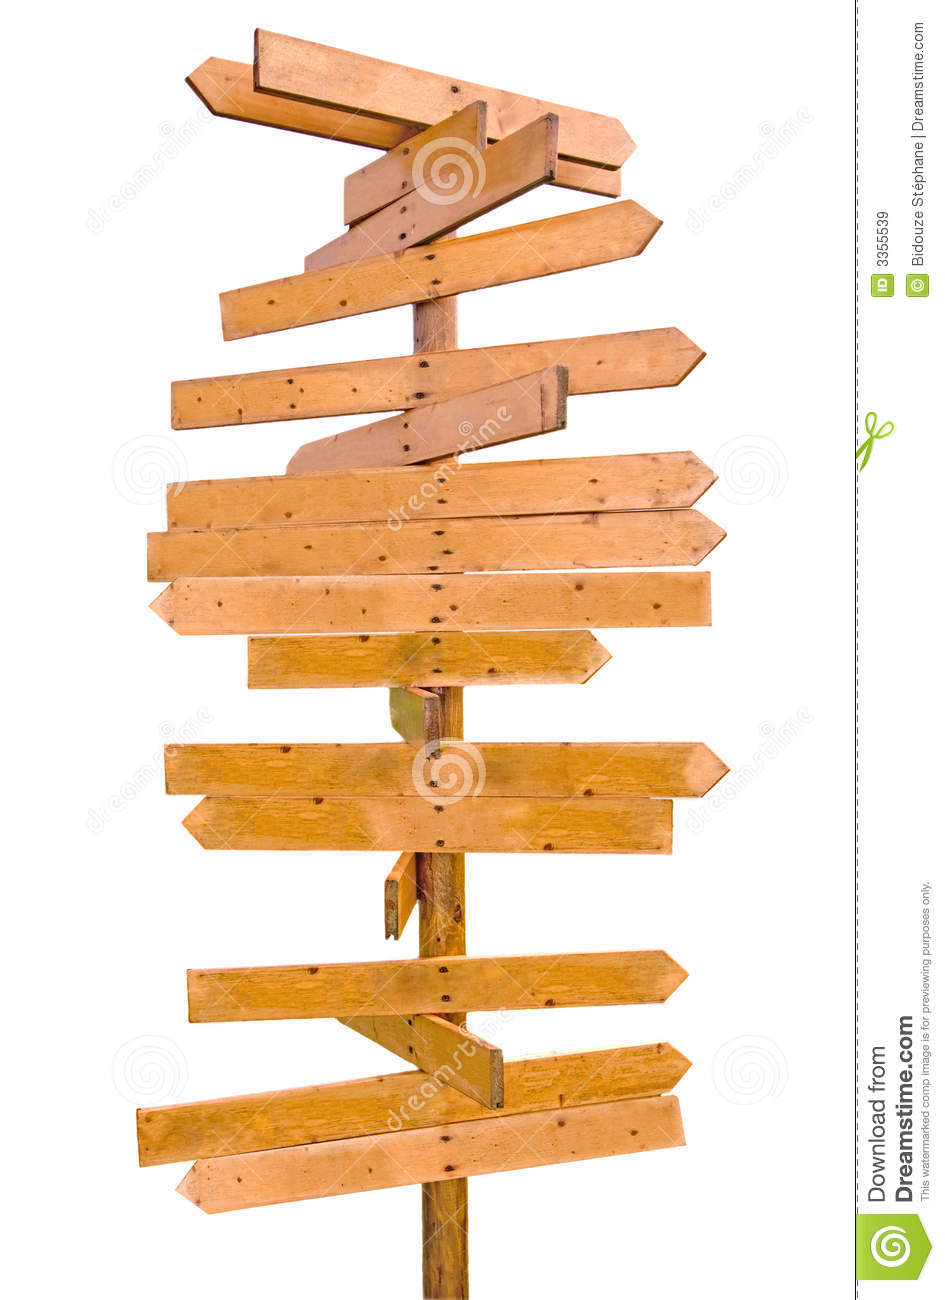 Wooden Blank Sign Post Royalty Free Stock Images   Image  3355539